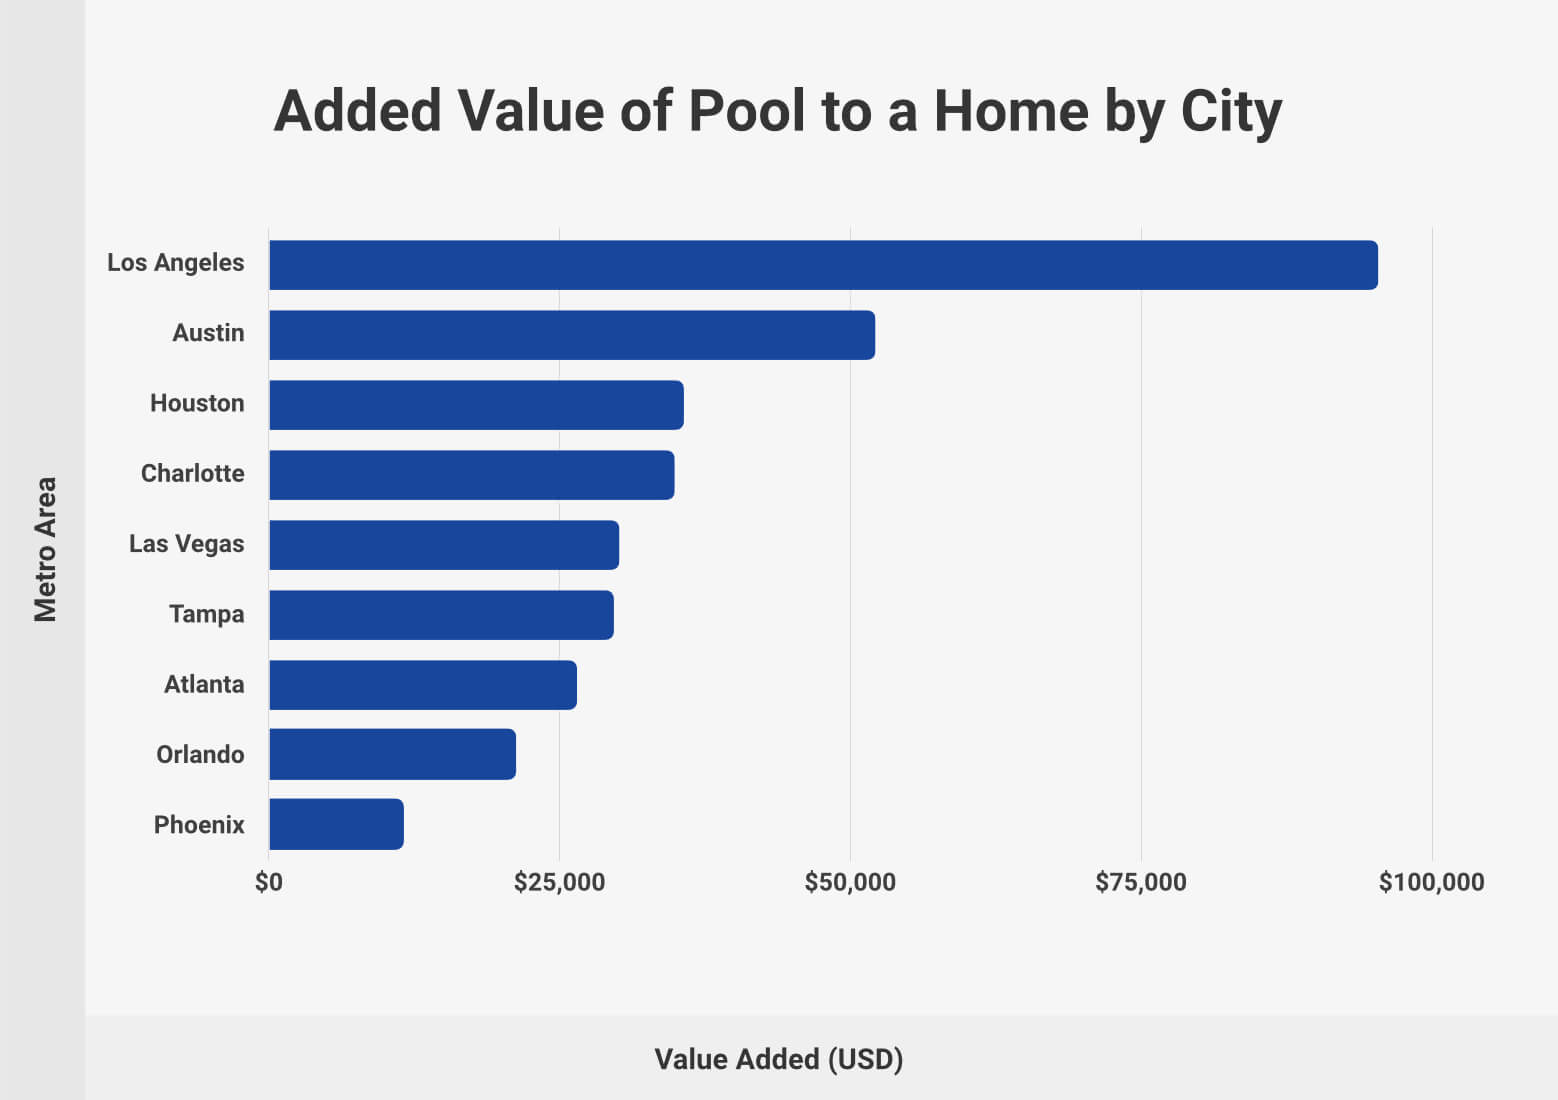 How Much Value Do Pools Add to Homes?